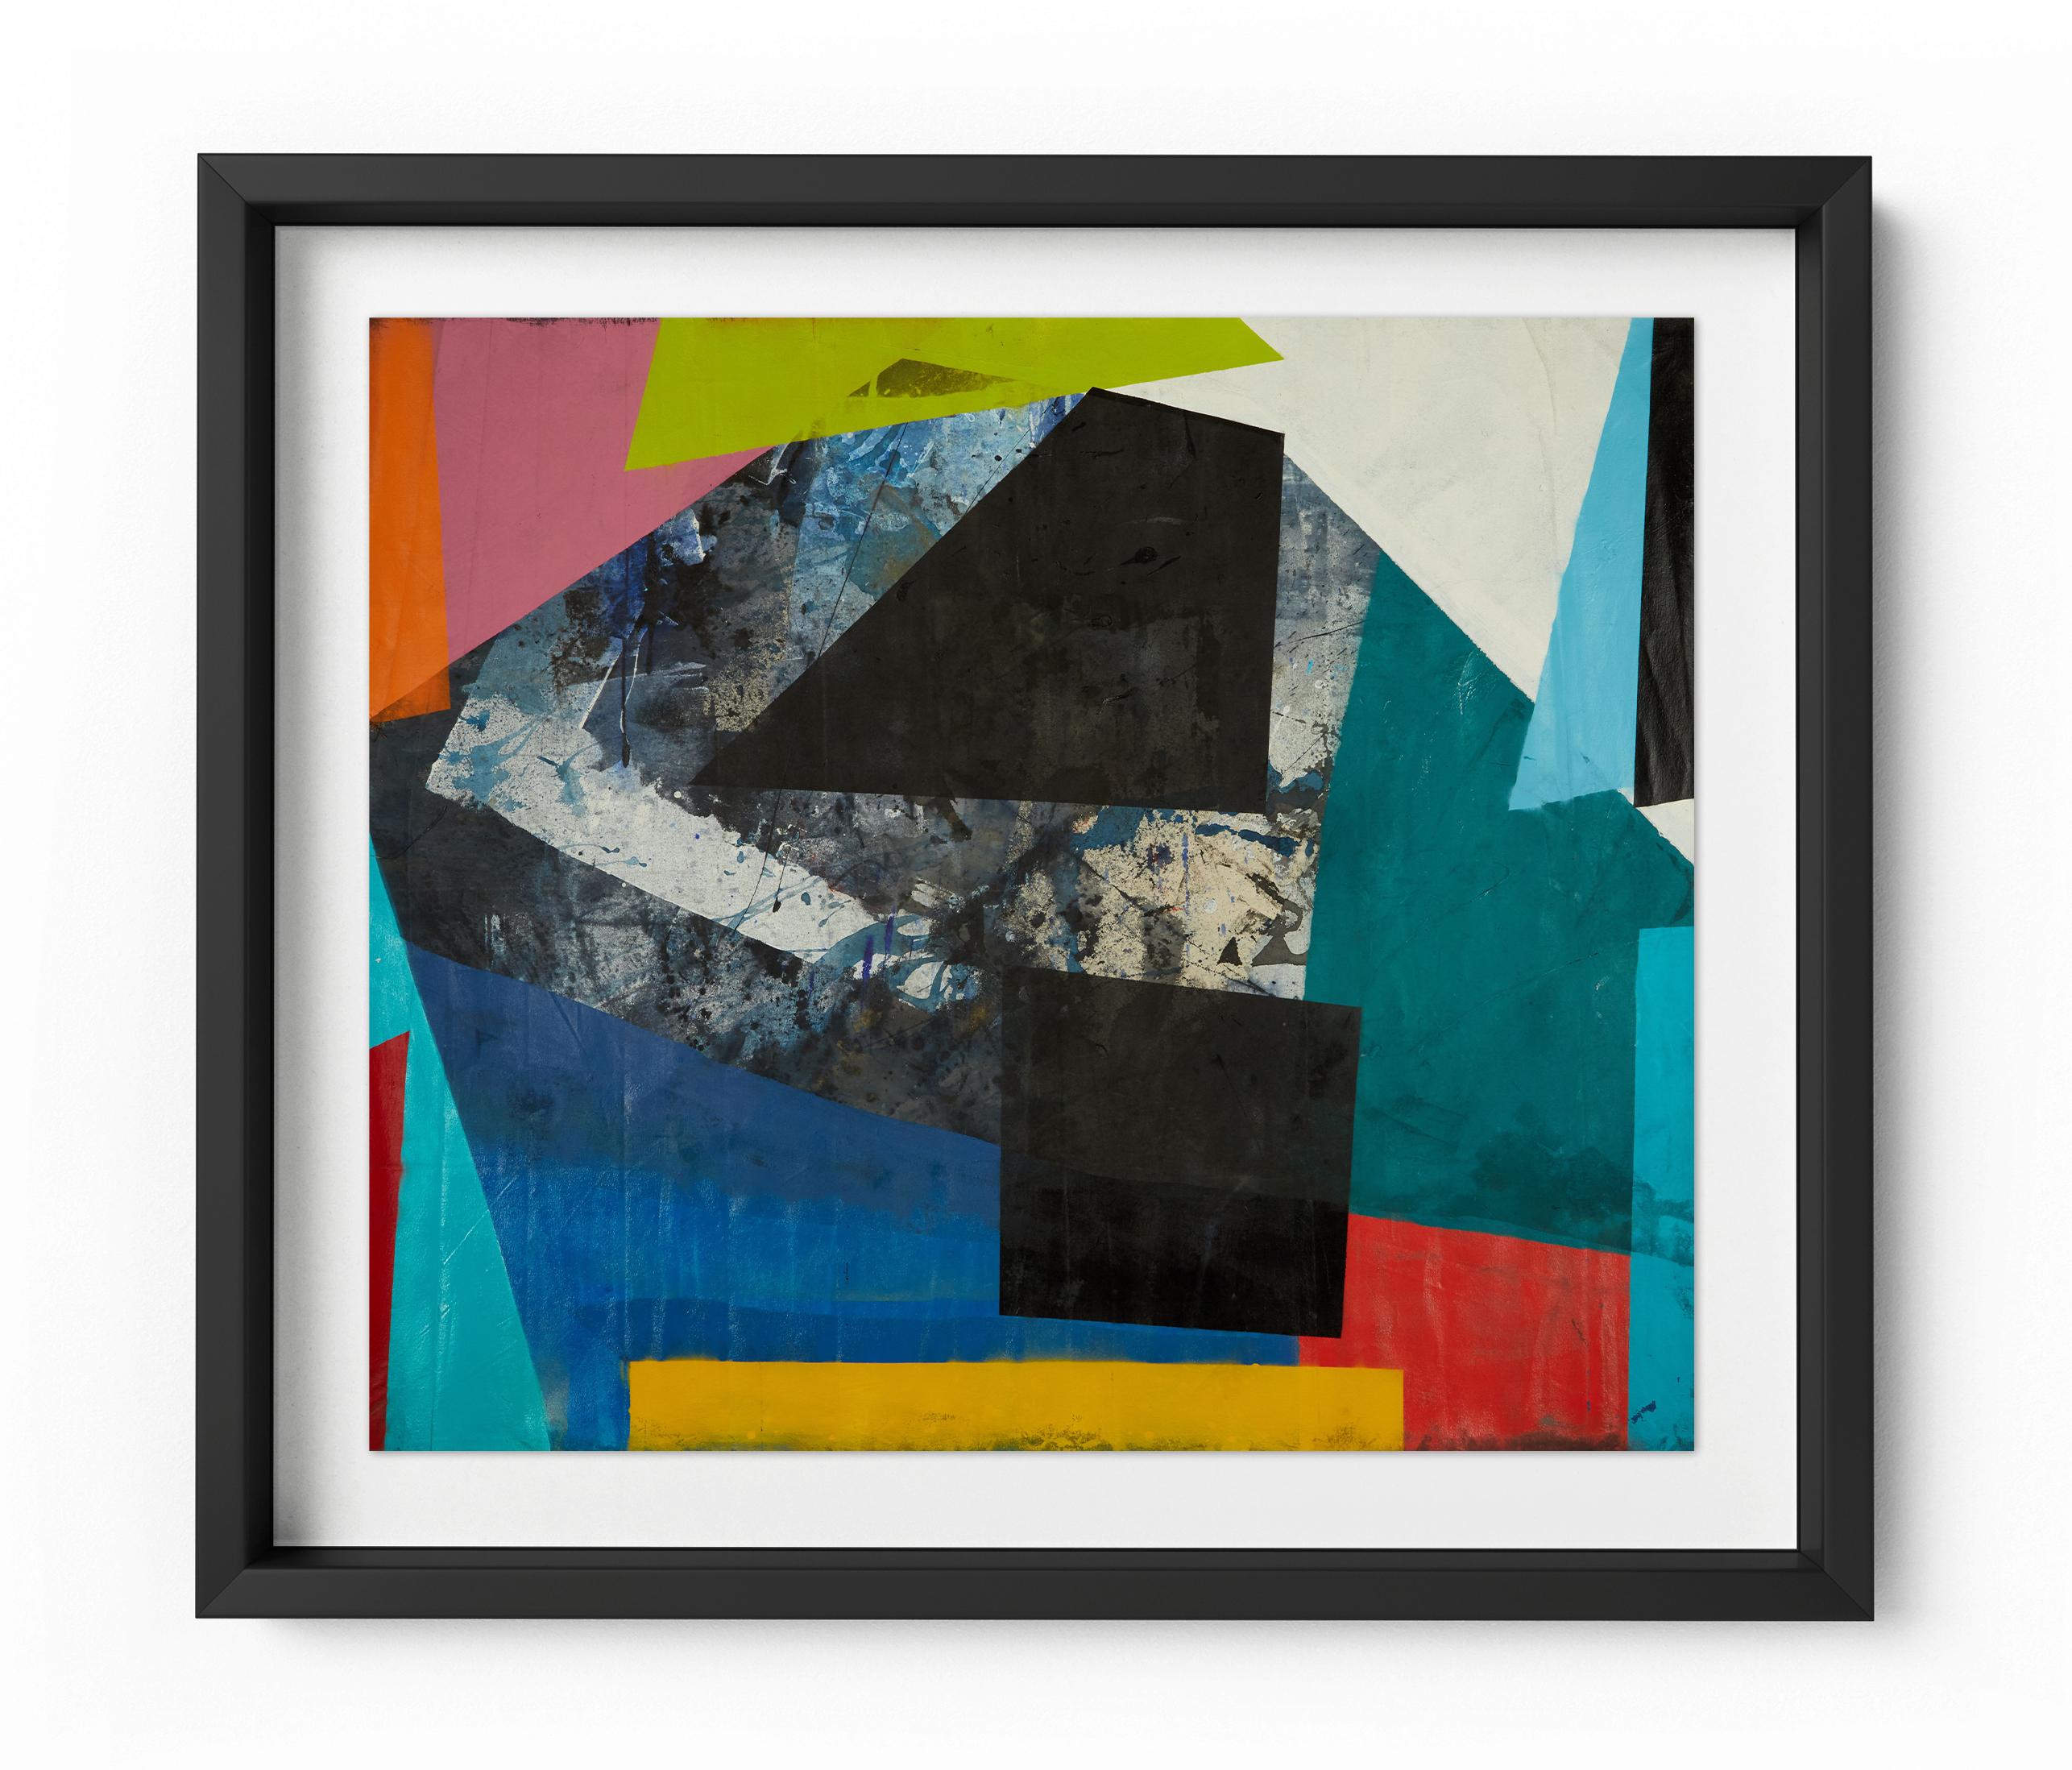 Karlos Marquez Abstract Print - Movement - Framed Limited Edition Print - Contemporary - Graffiti Inspired